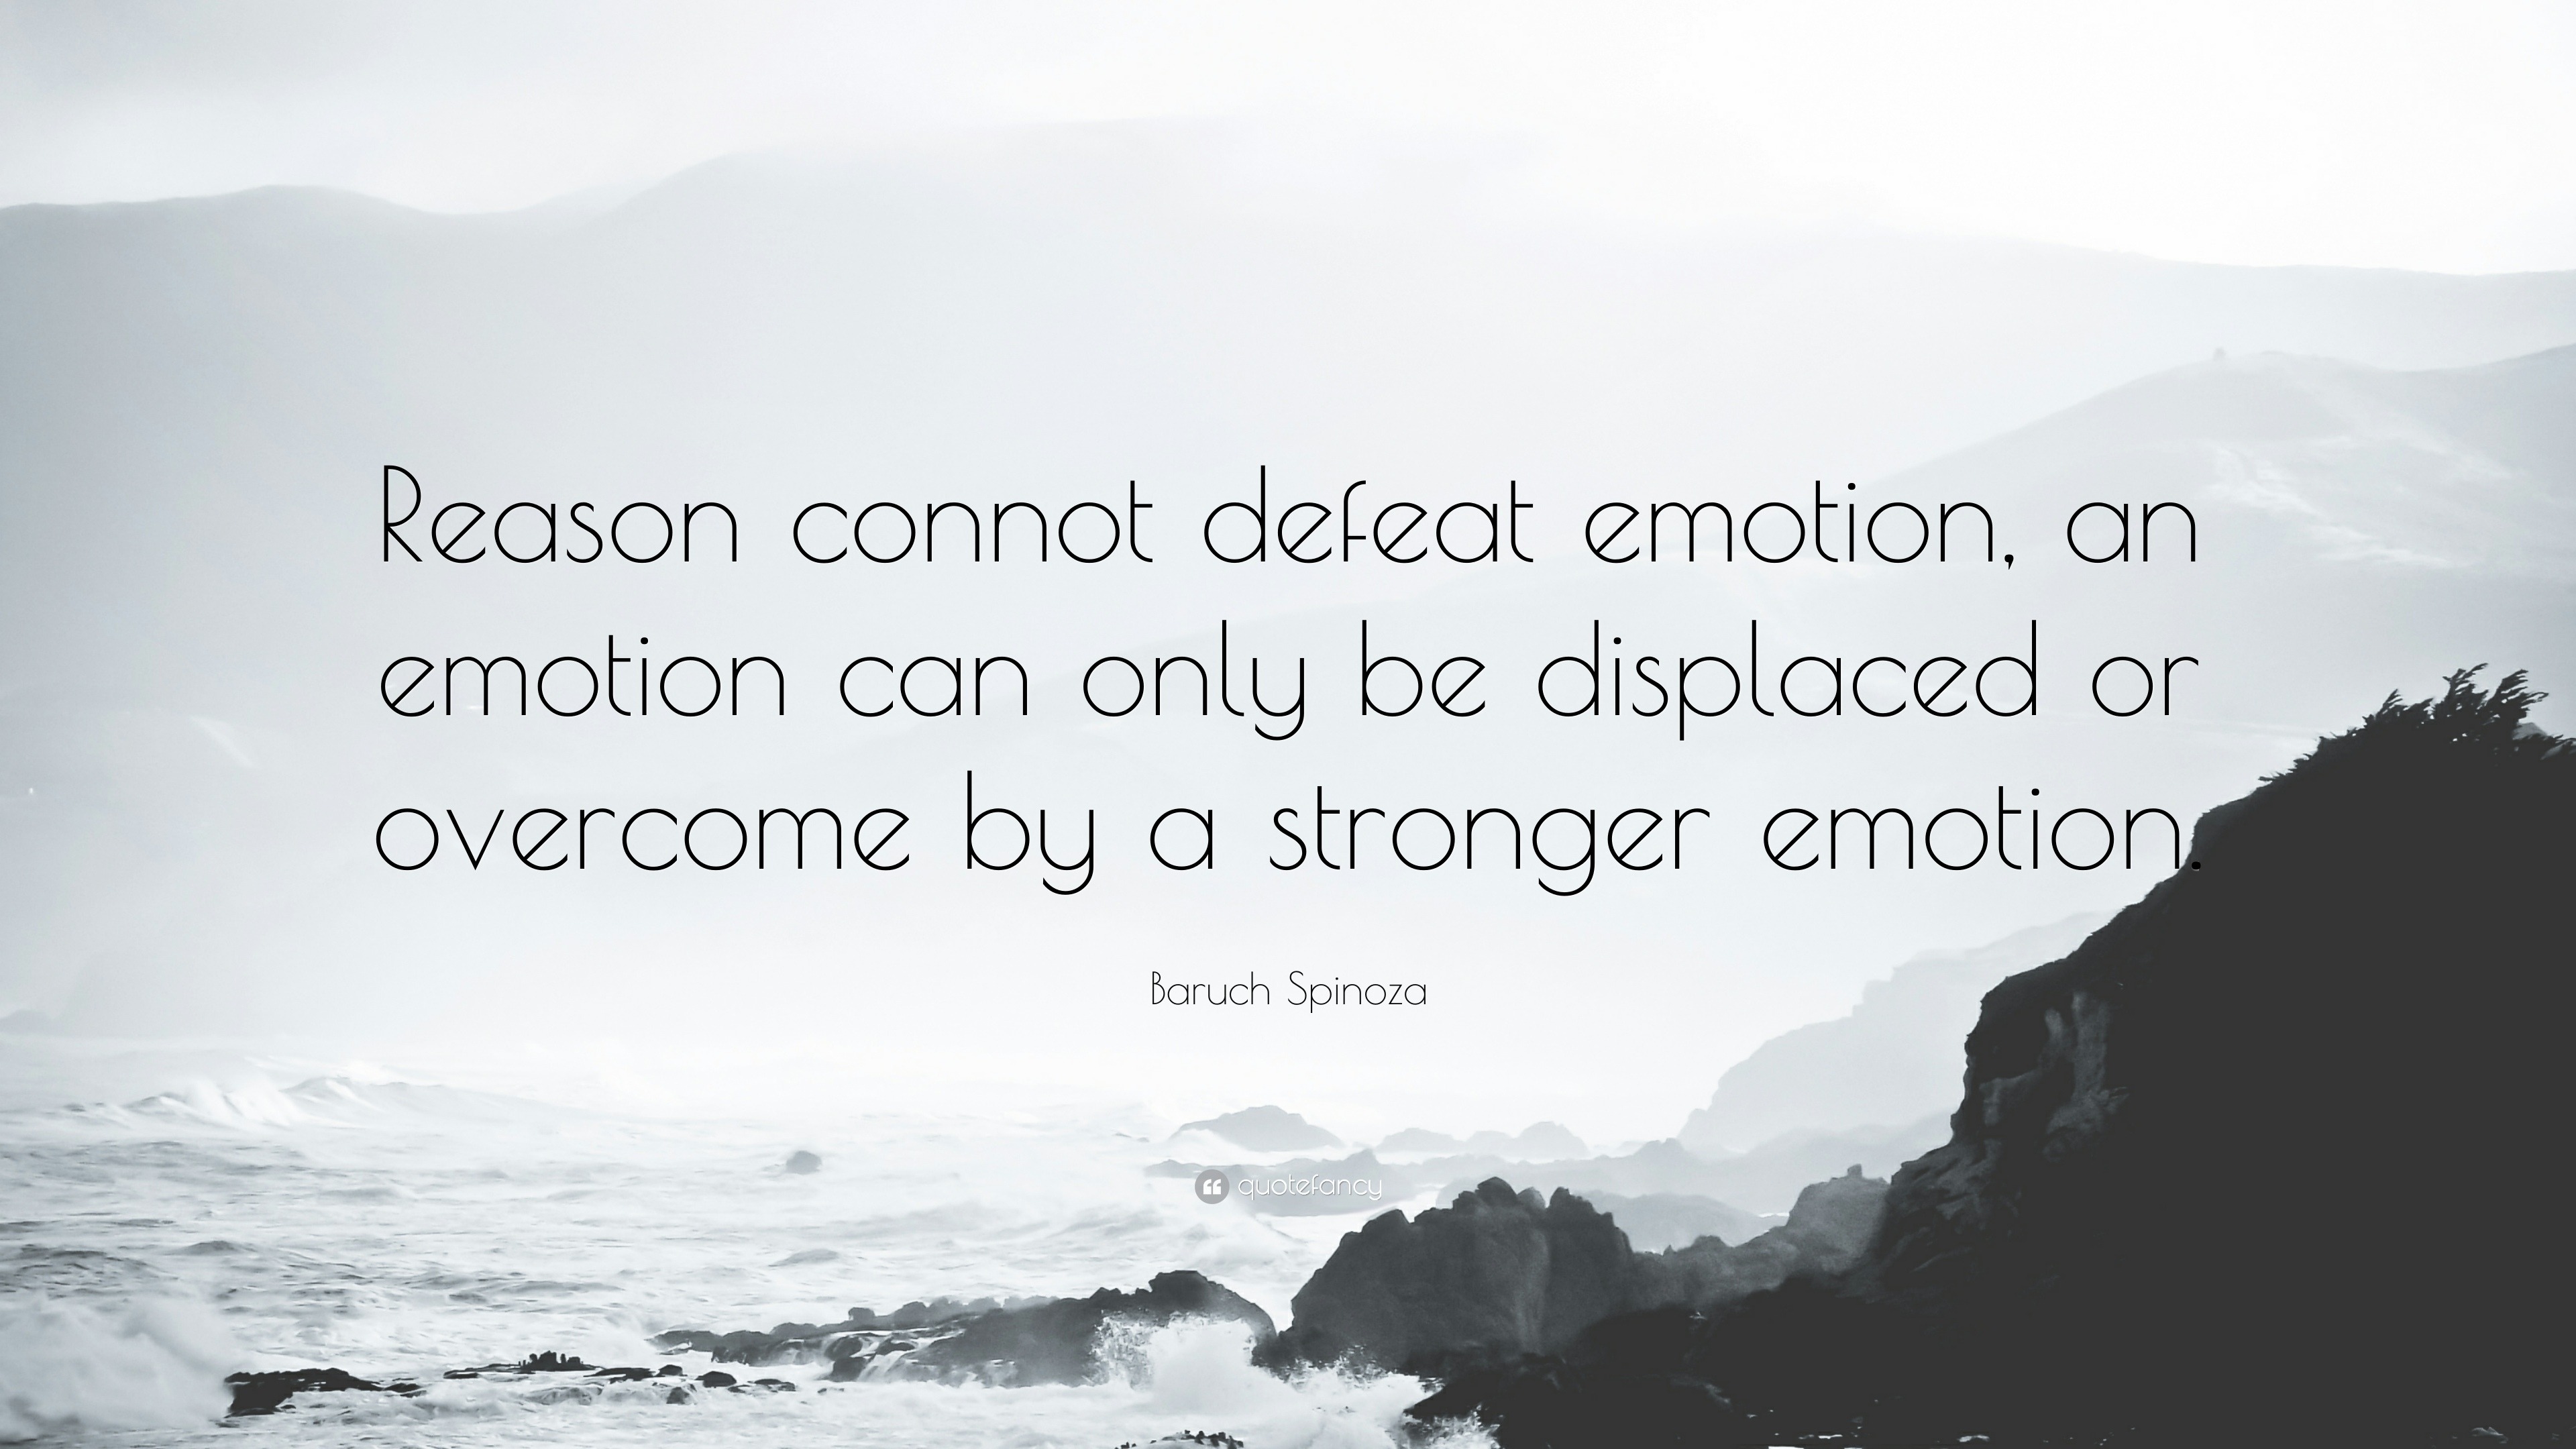 Baruch Spinoza Quote: “Reason connot defeat emotion, an emotion can ...